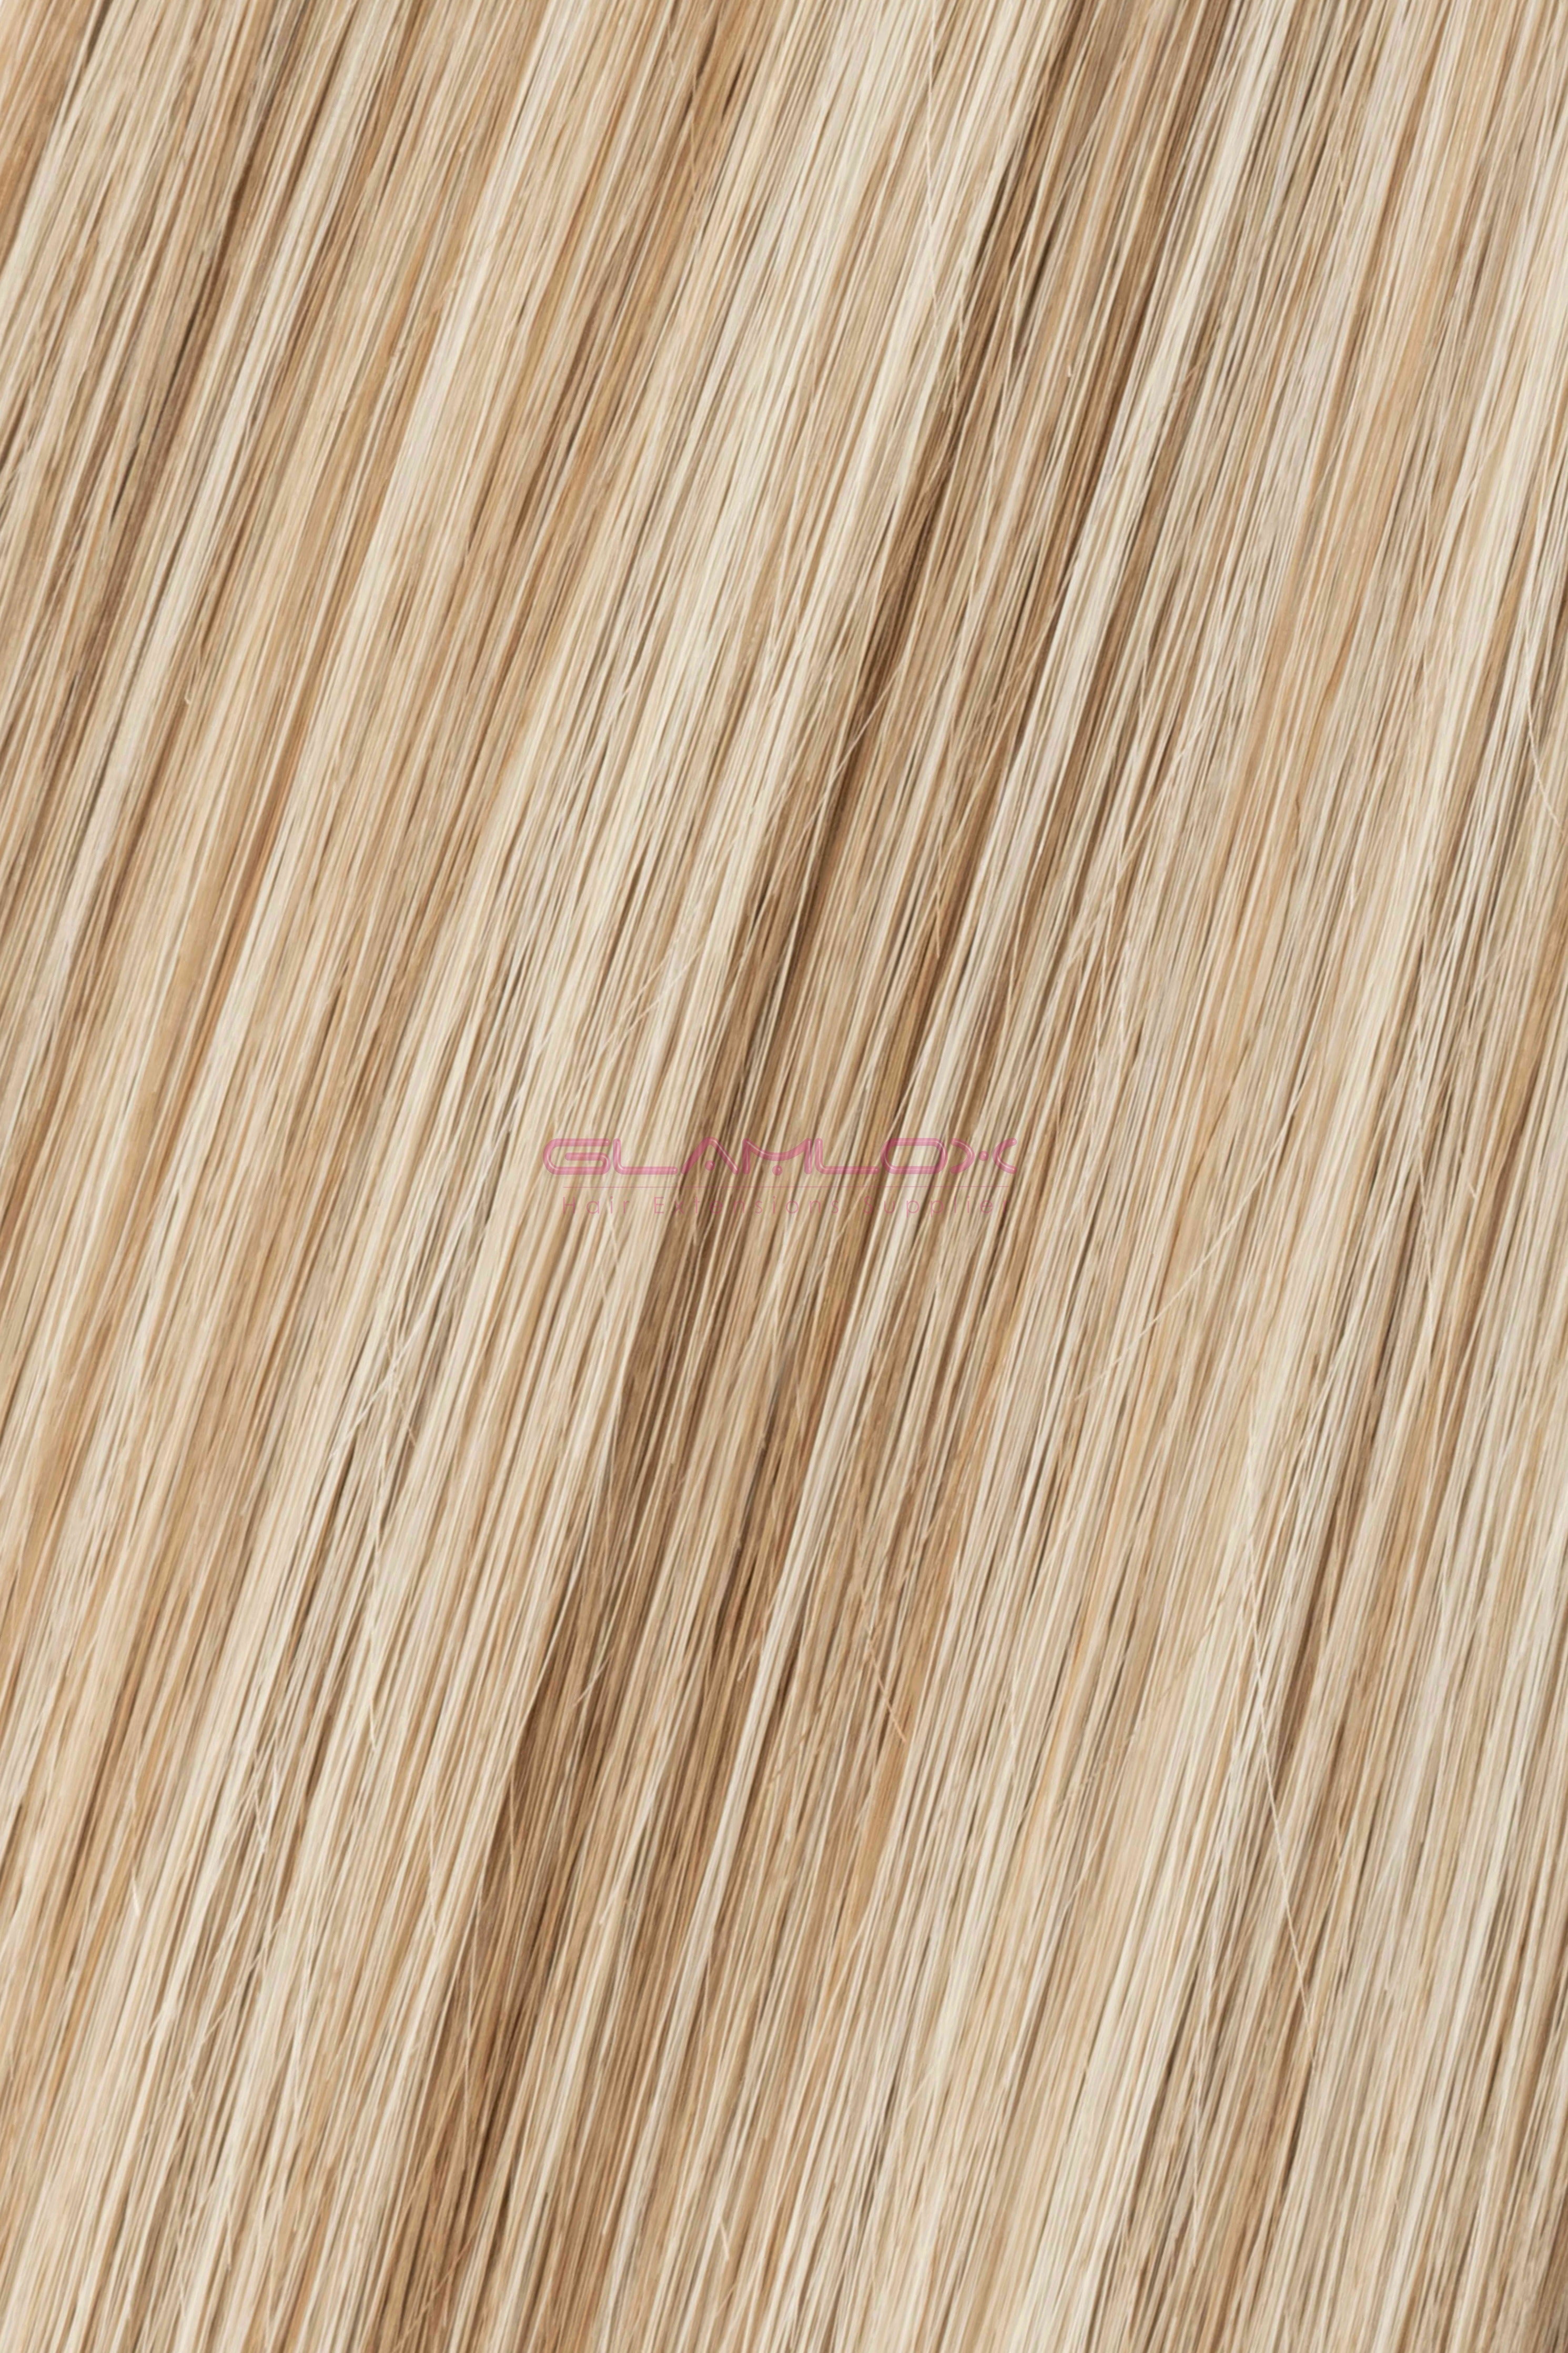 14" Nano Ring Hair Extensions - Russian Mongolian Double Drawn Remy Human Hair - 100 Strands